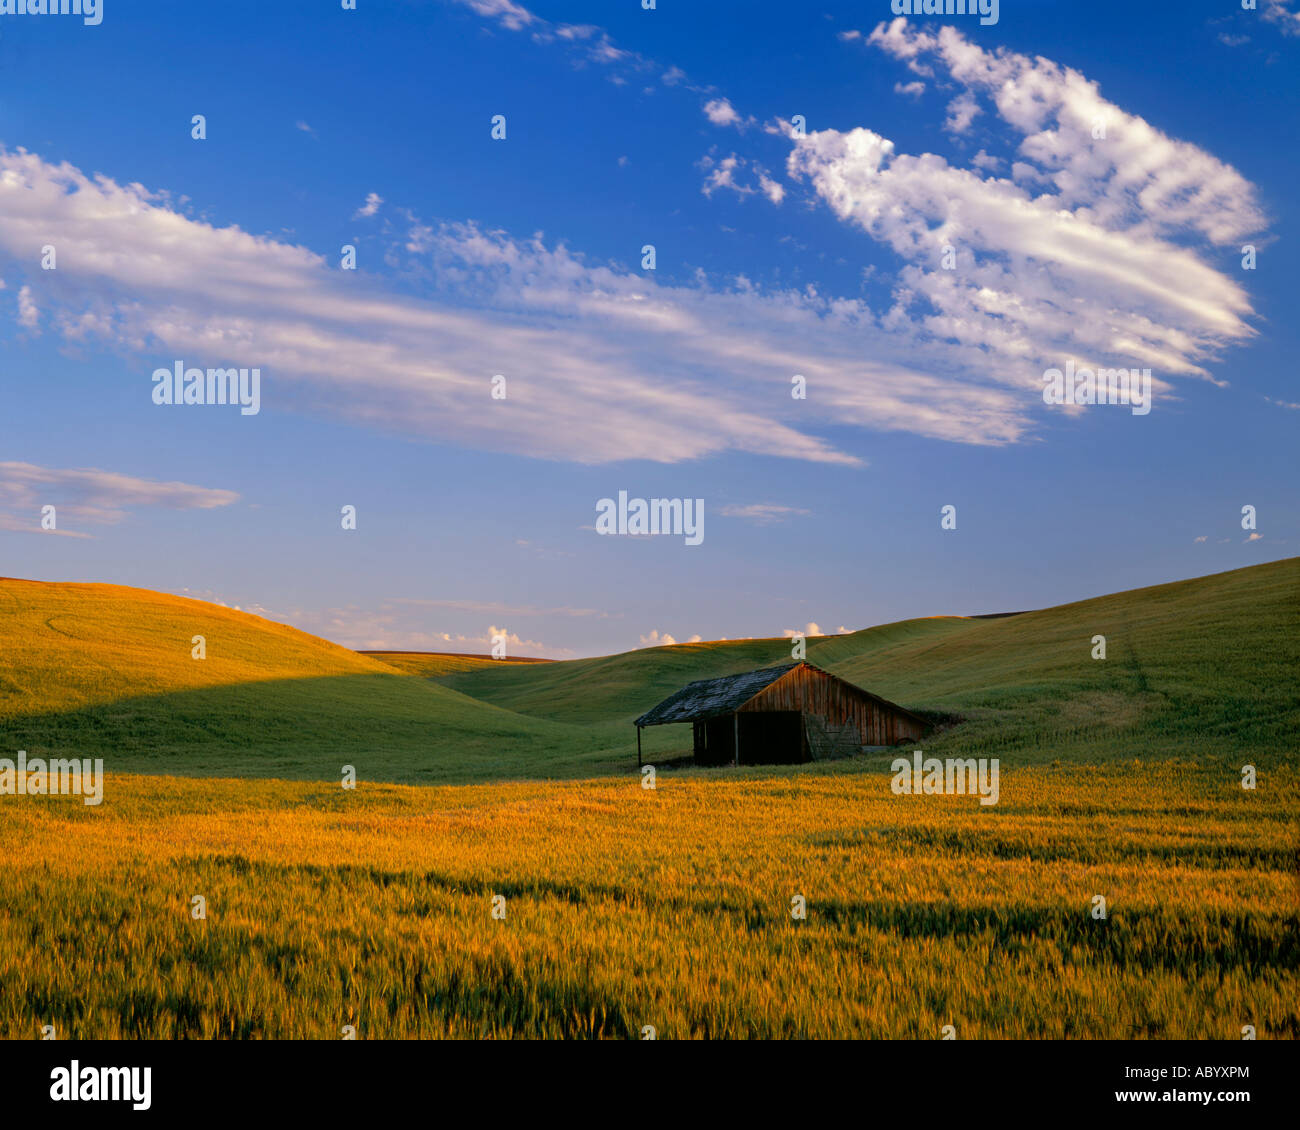 Whitman County, WA: Evening light on a field of winter wheat with a weathered livestock shelter Stock Photo